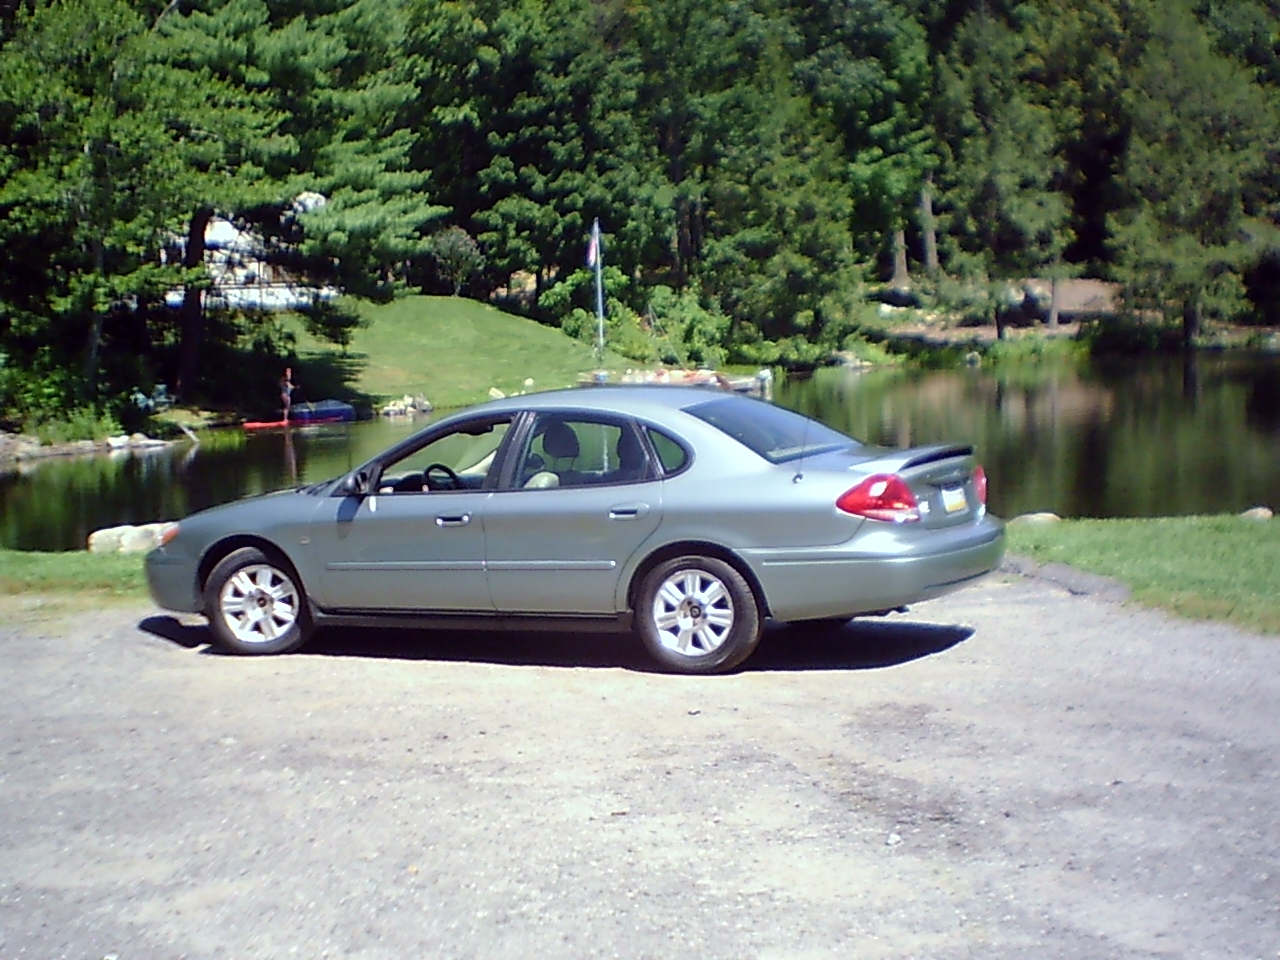 2005 Ford taurus wagon review #2